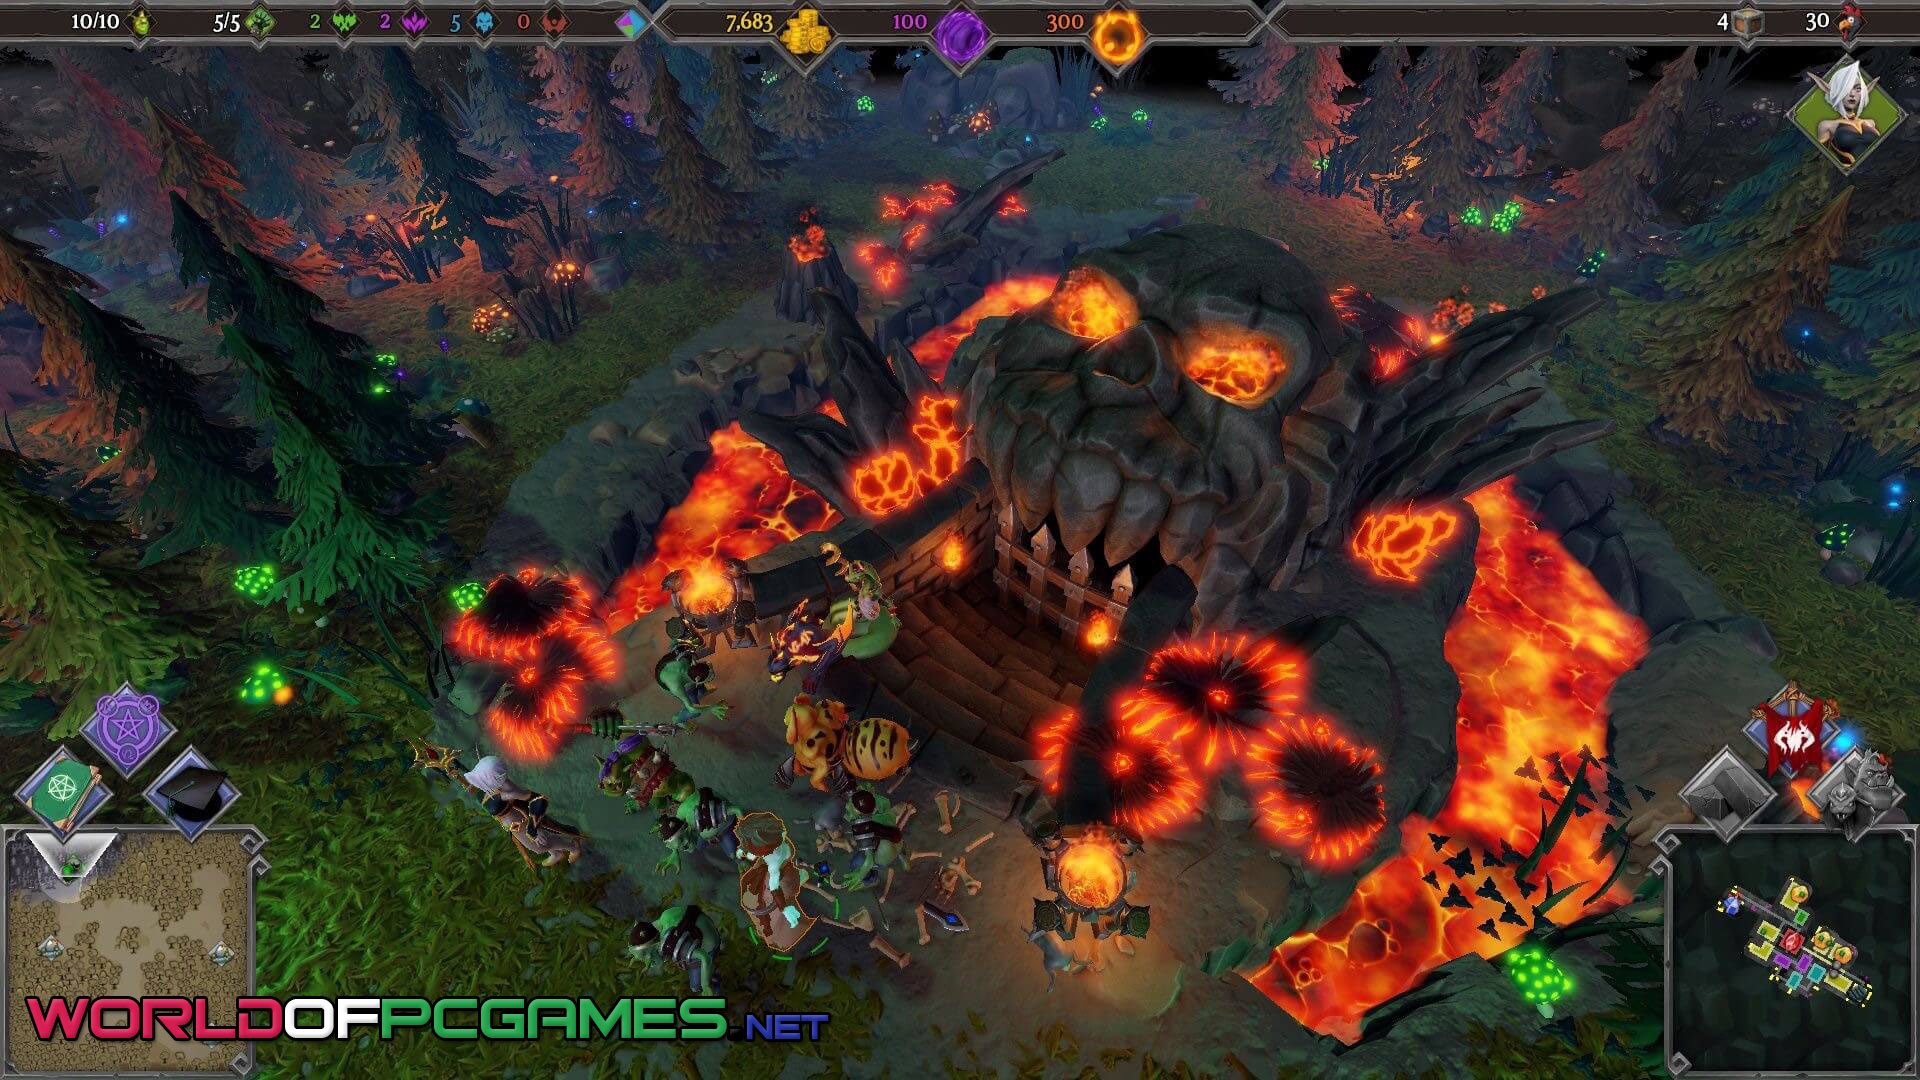 Dungeons 3 Free Download PC Game By worldof-pcgames.netm